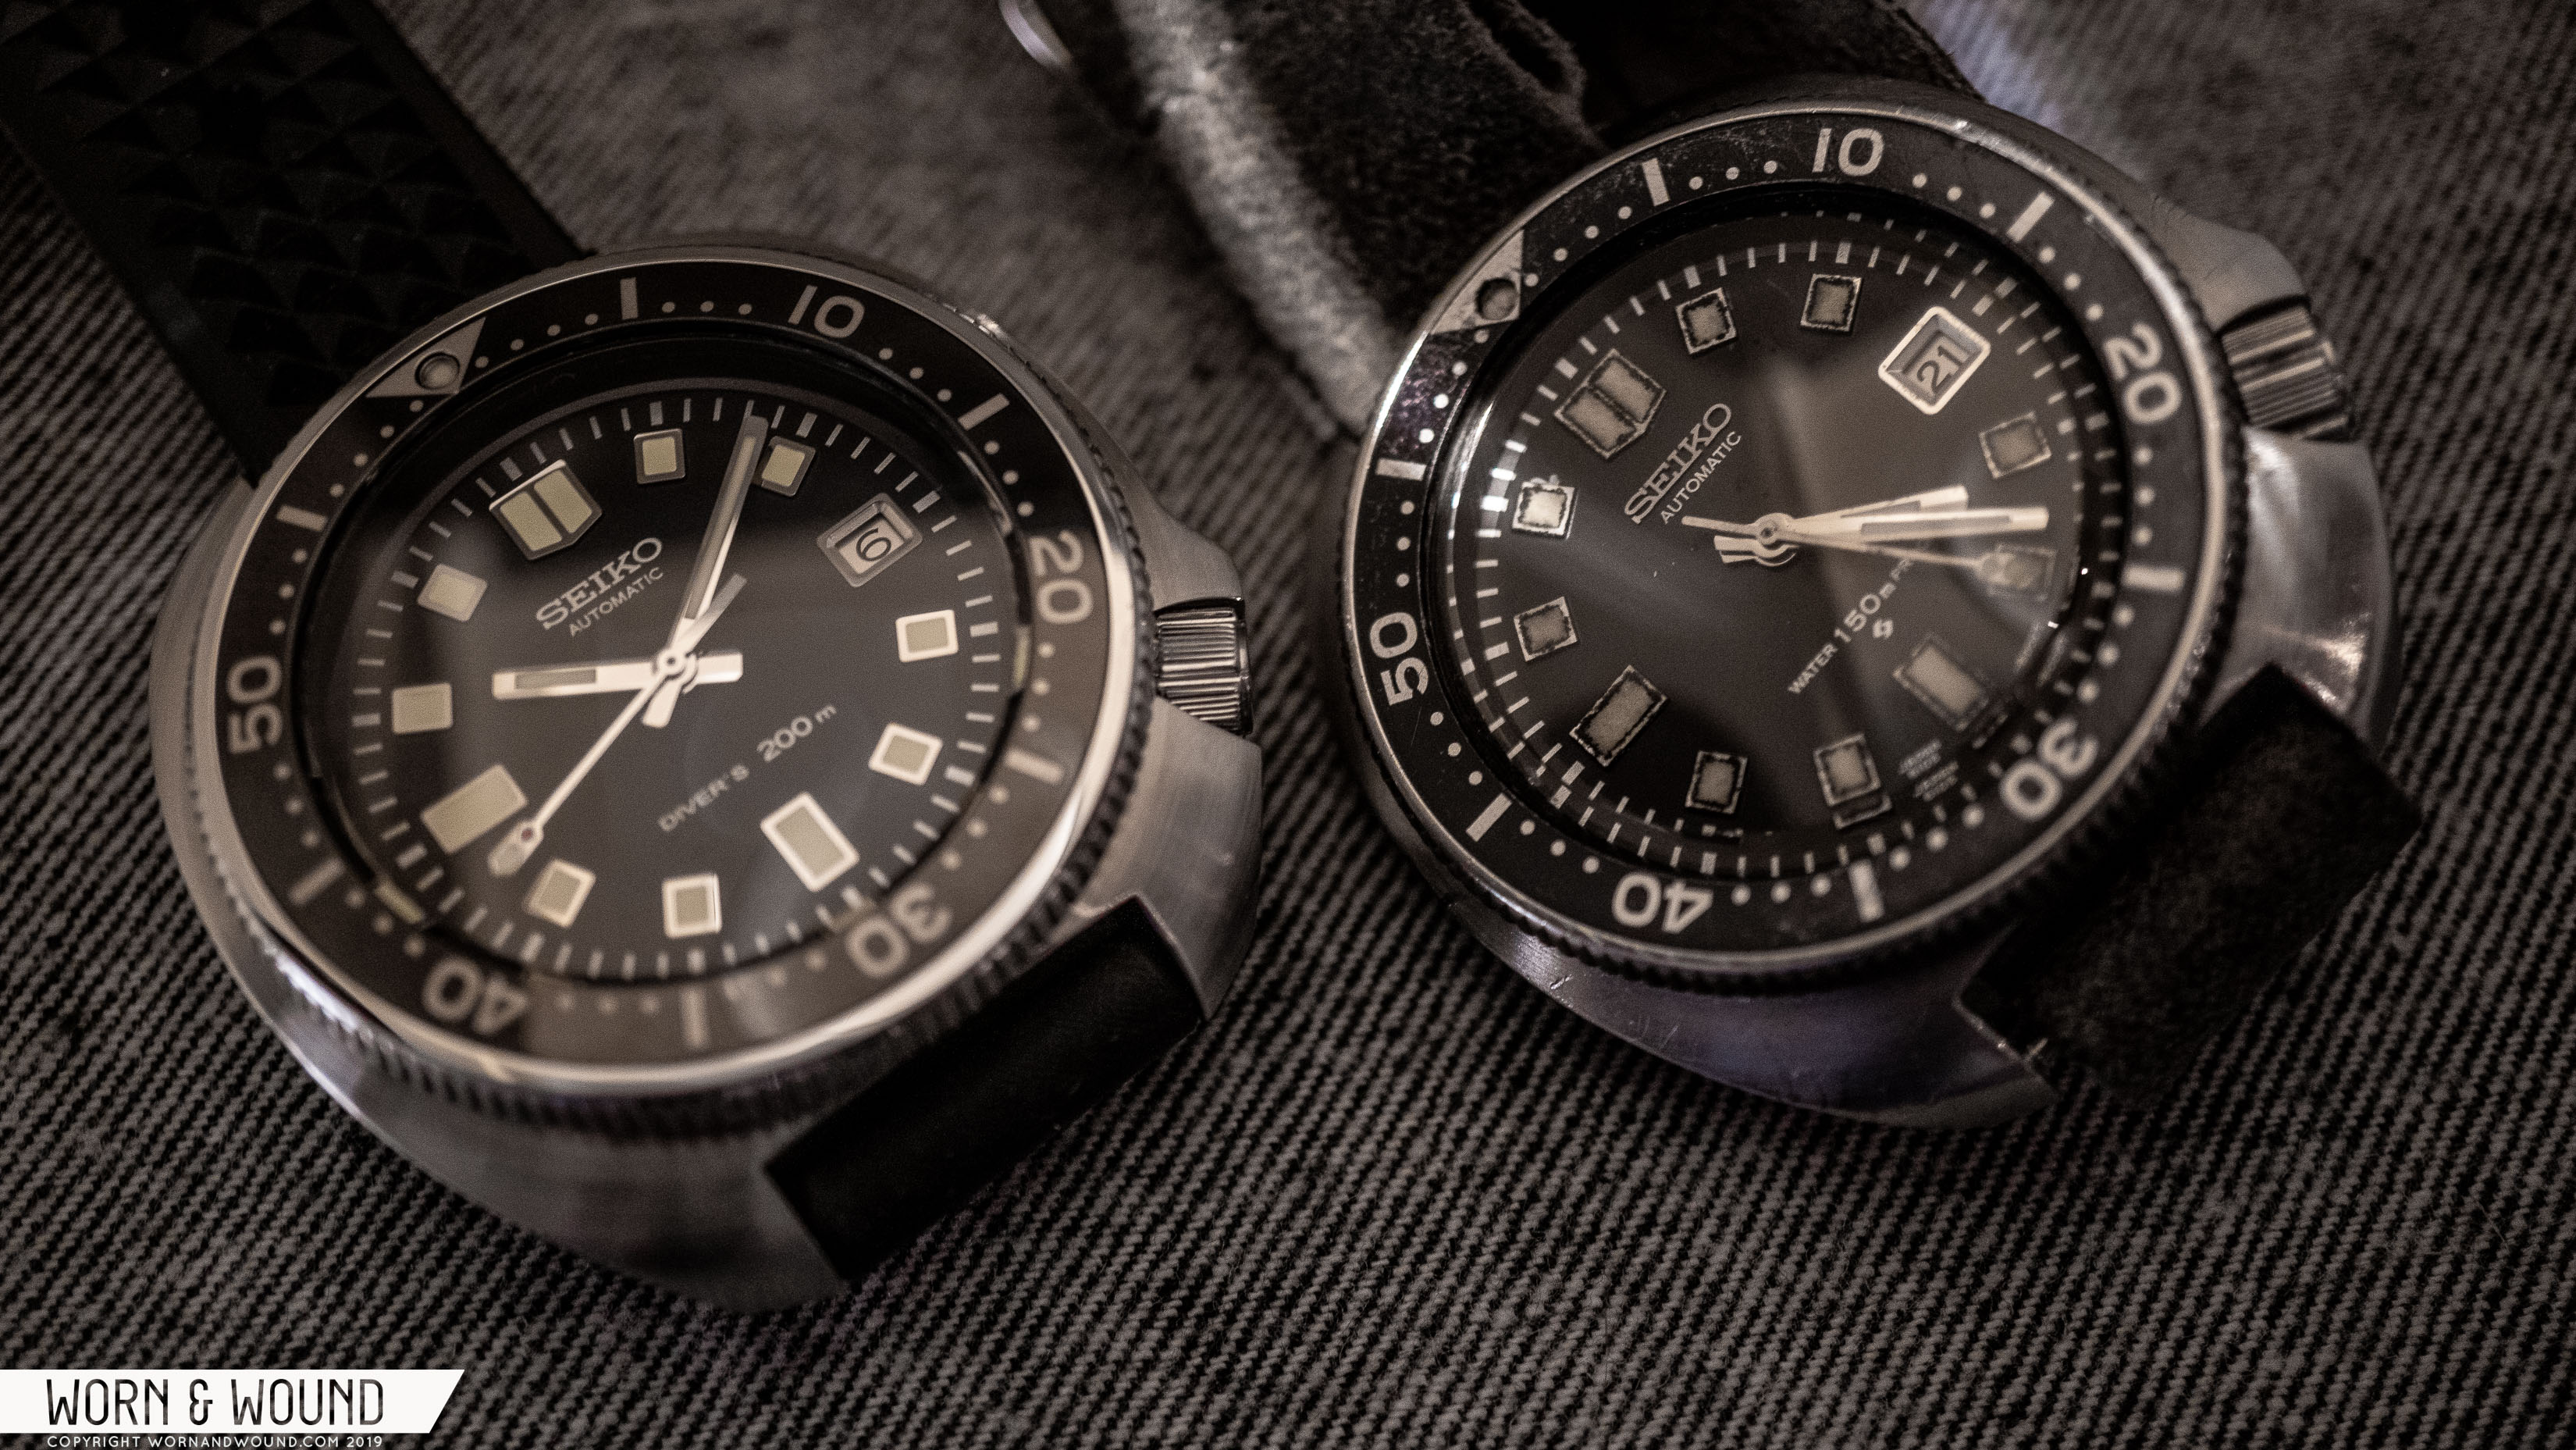 Baselworld 2019: Gallery of the Seiko Ref. SLA033, the Reissue of the  Iconic 6105 Diver - Worn & Wound